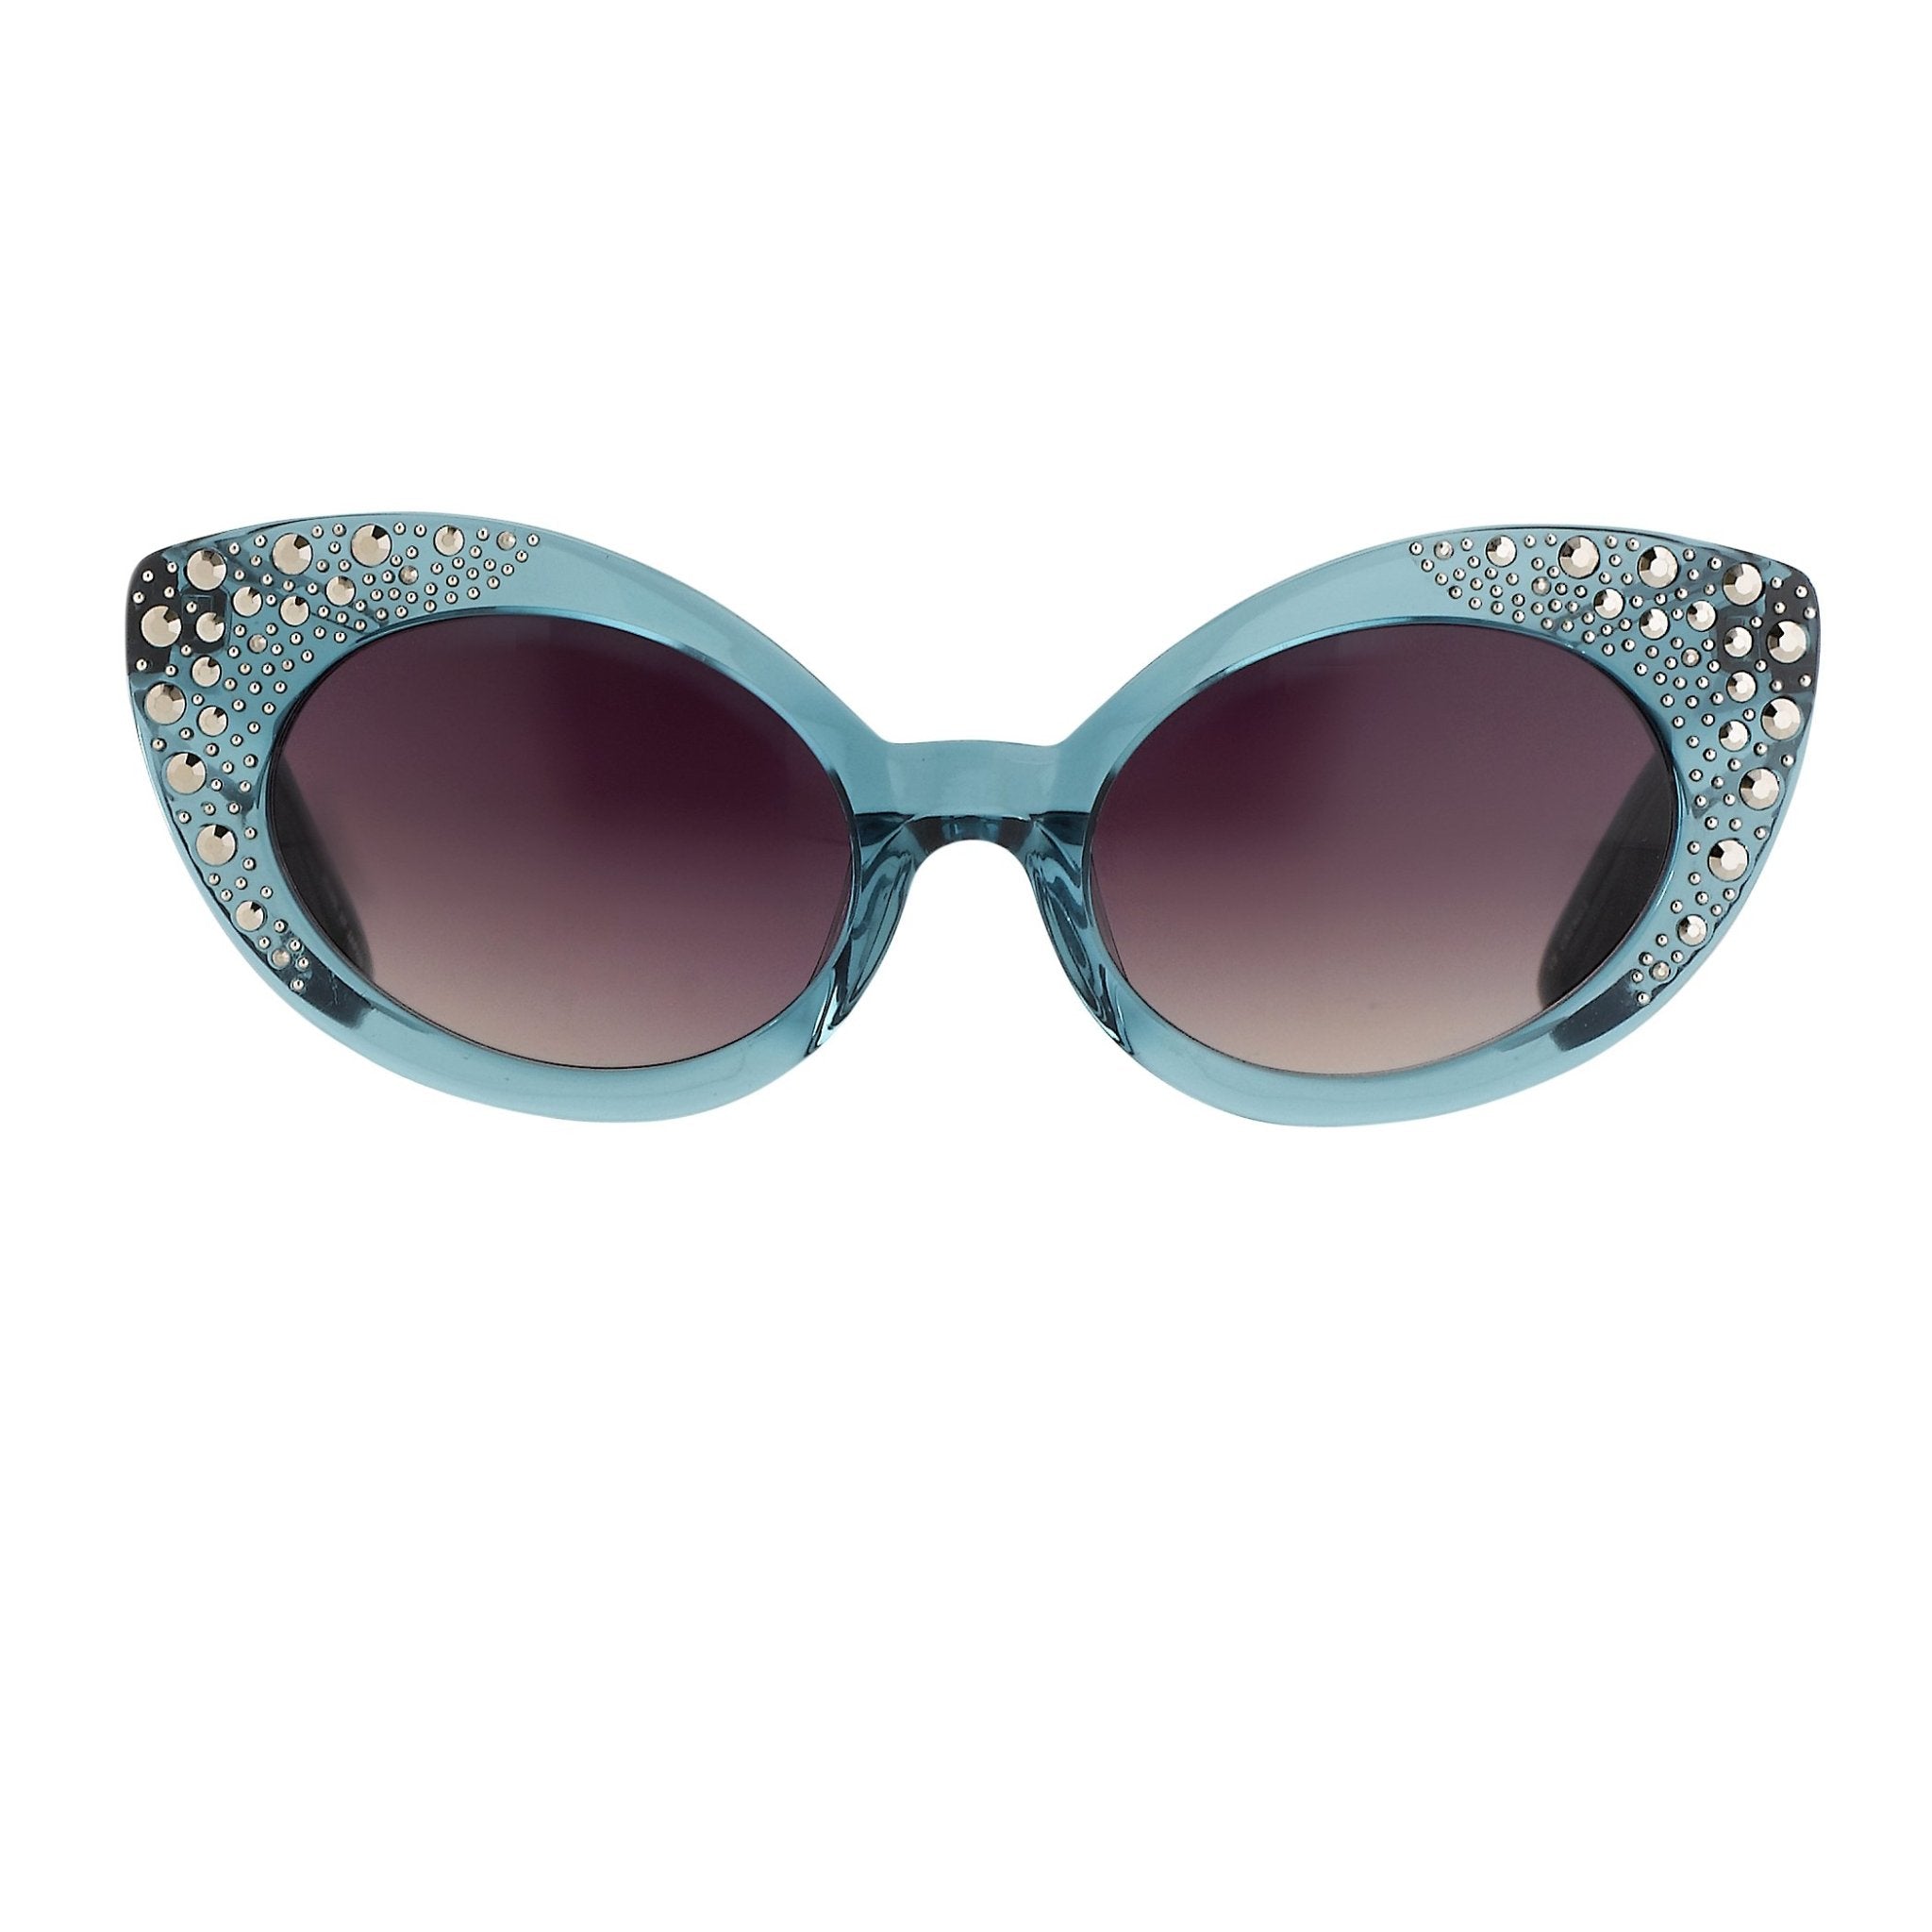 Agent Provocateur Women Sunglasses Oval Blue and Grey Lenses Category 3 - AP1C5SUN - Watches & Crystals